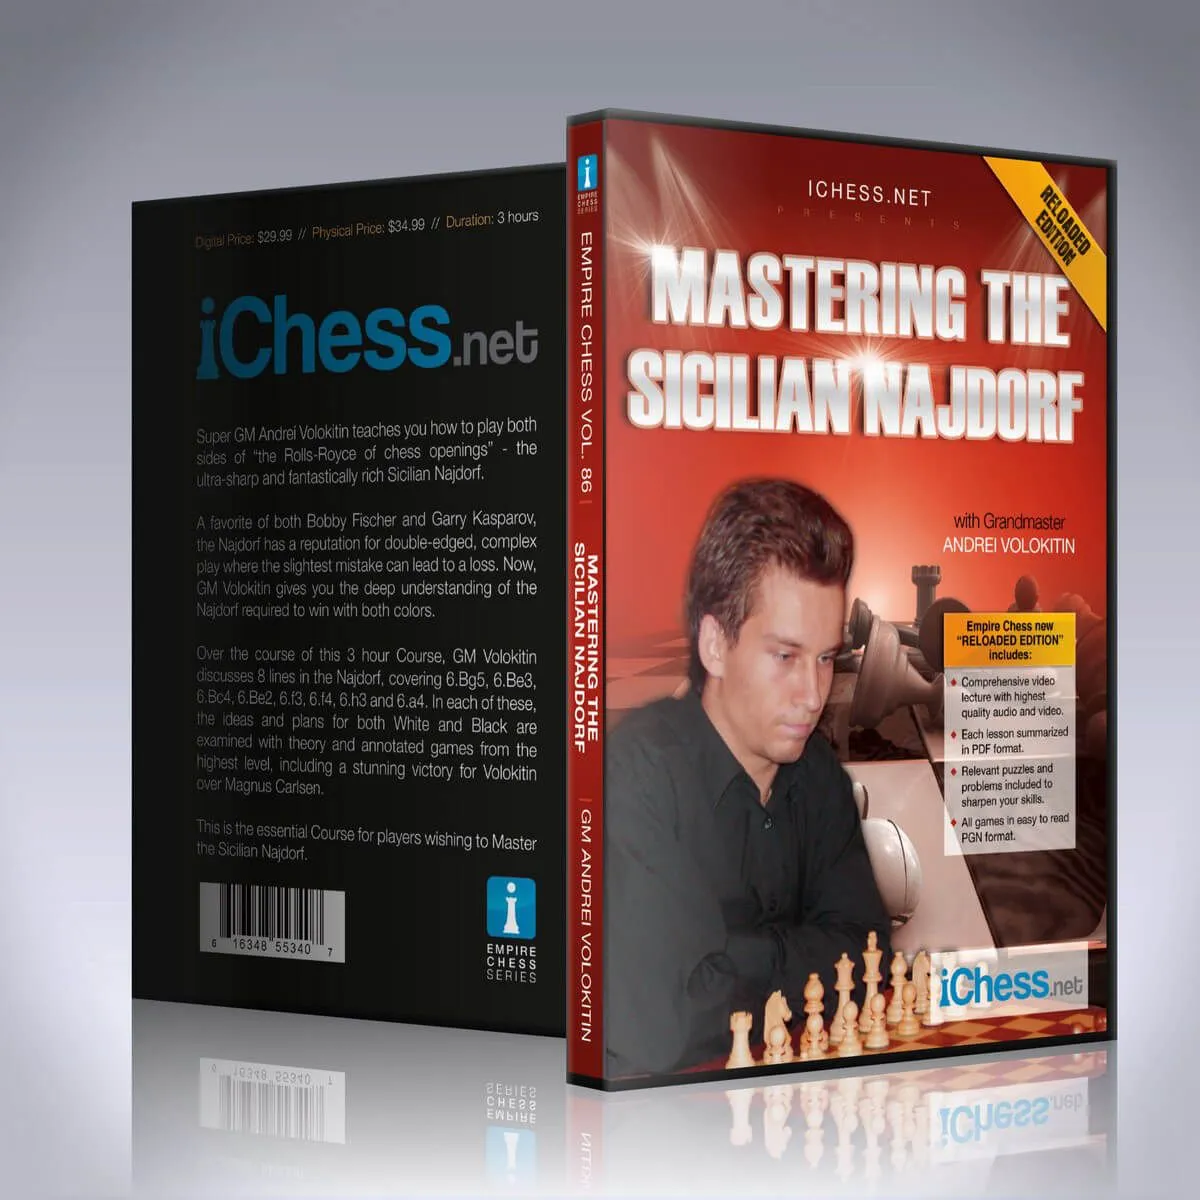 Mastering The Chess Openings, Volume 3, PDF, Chess Openings